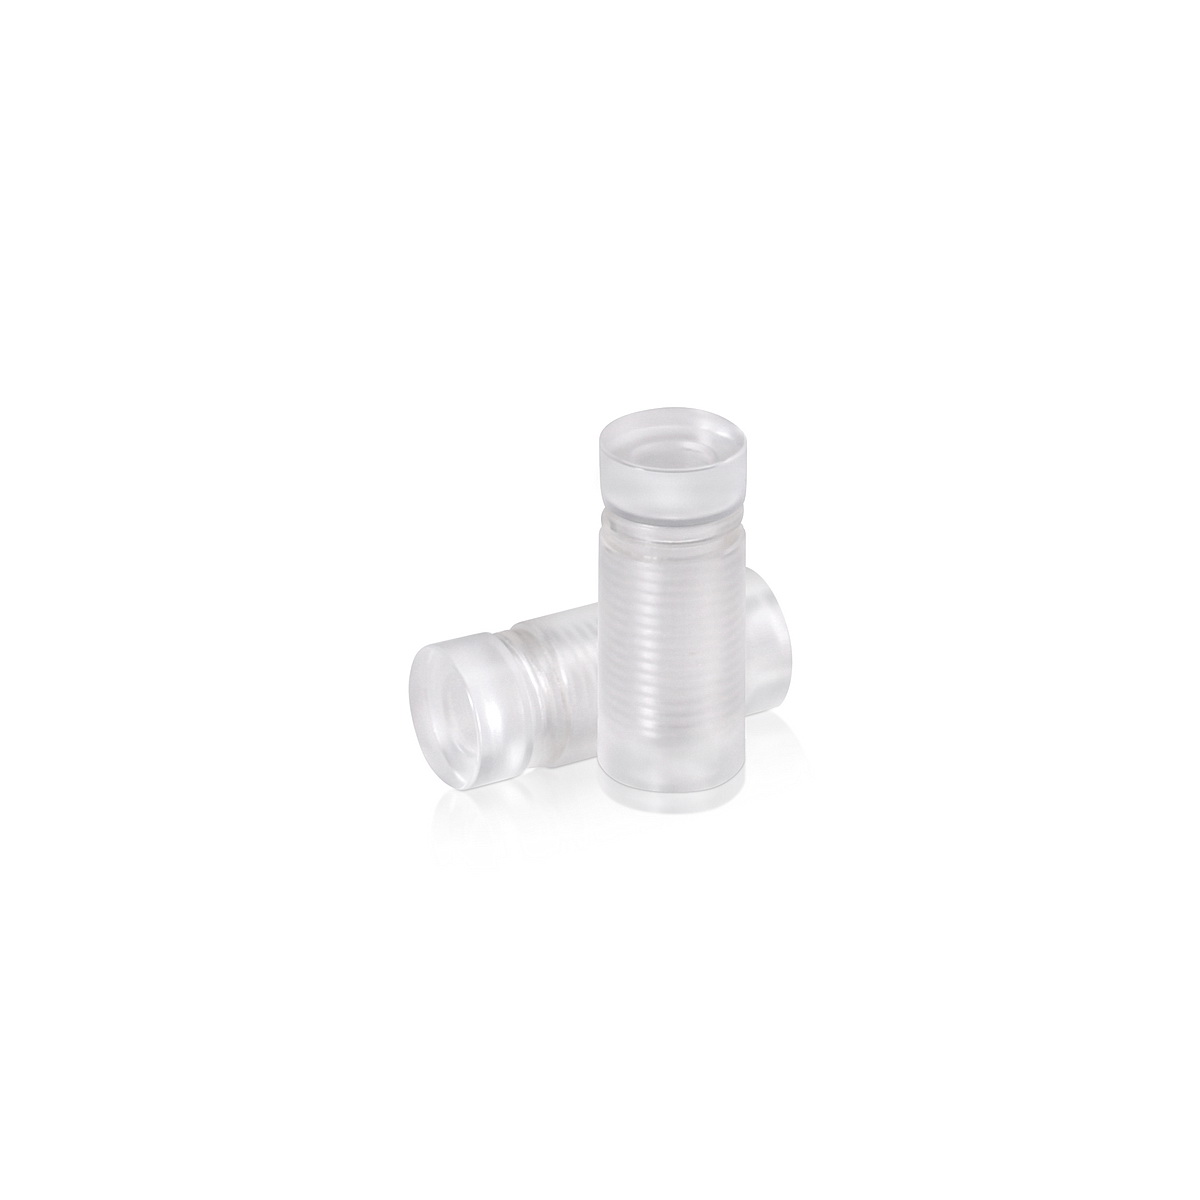 5/8'' Diameter X 3/4'' Barrel Length, Clear Acrylic Standoff. Easy Fasten Standoff (For Inside Use Only) Tamper Proof [Required Material Hole Size: 3/8'']